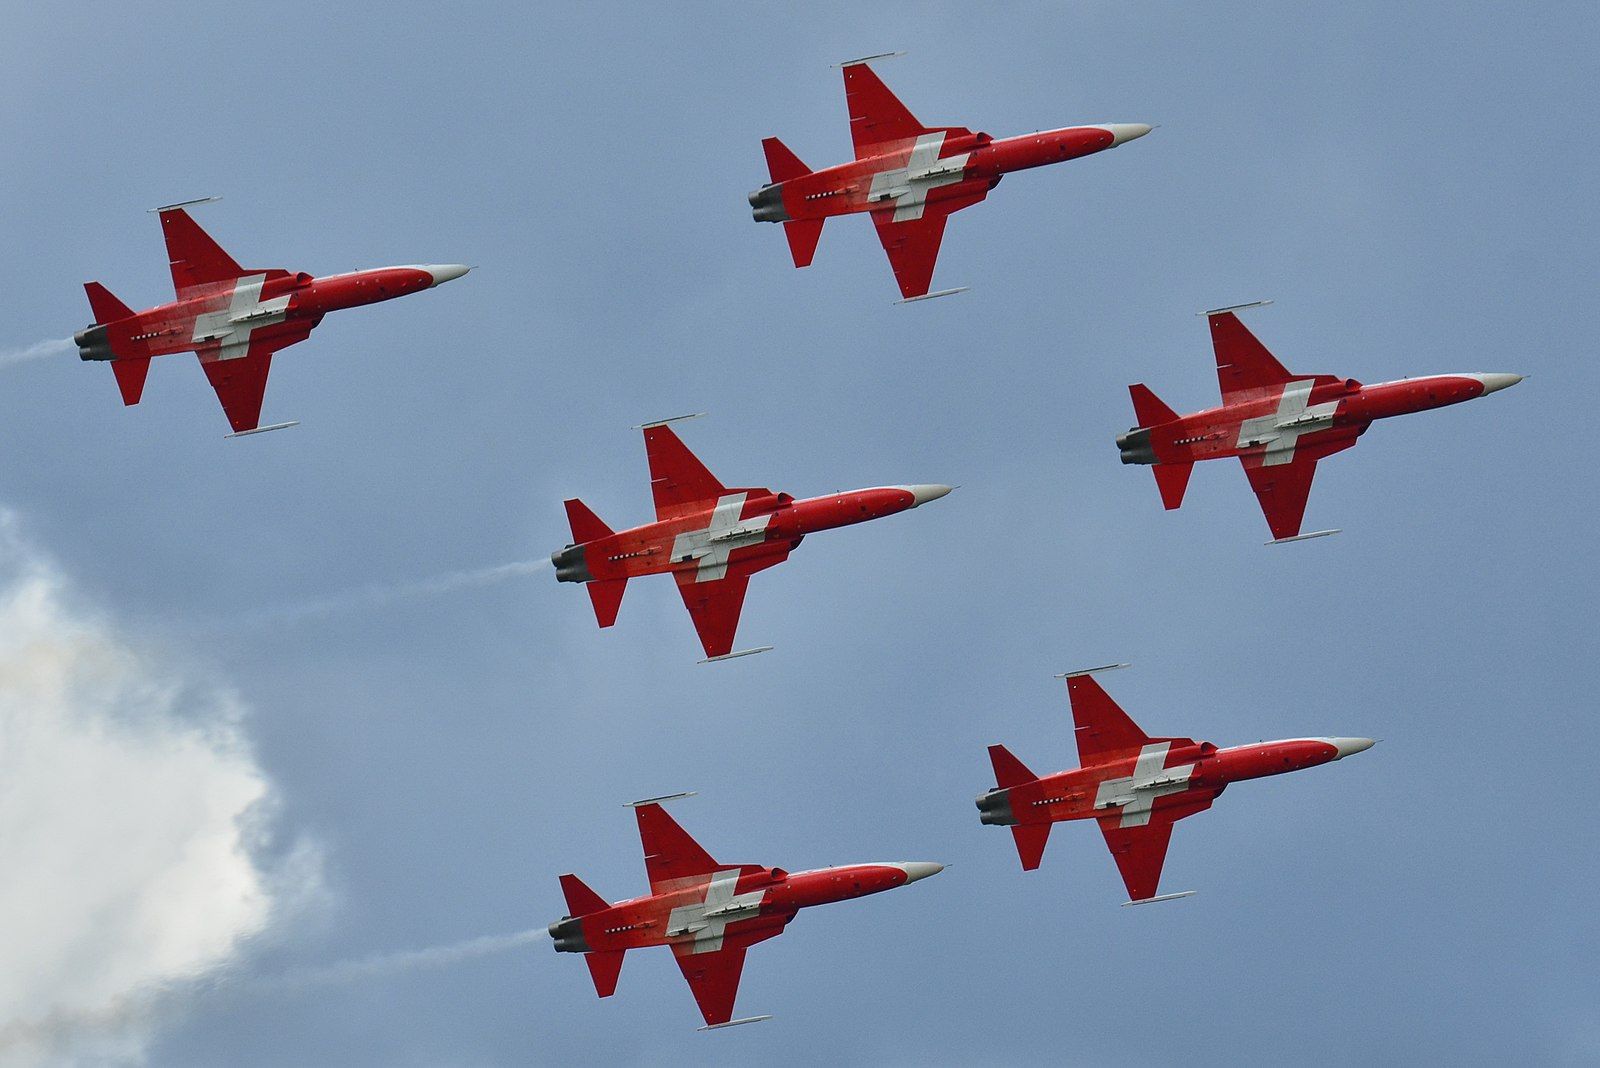 Council of State asks Patrouille Suisse to use F-5E Tiger II